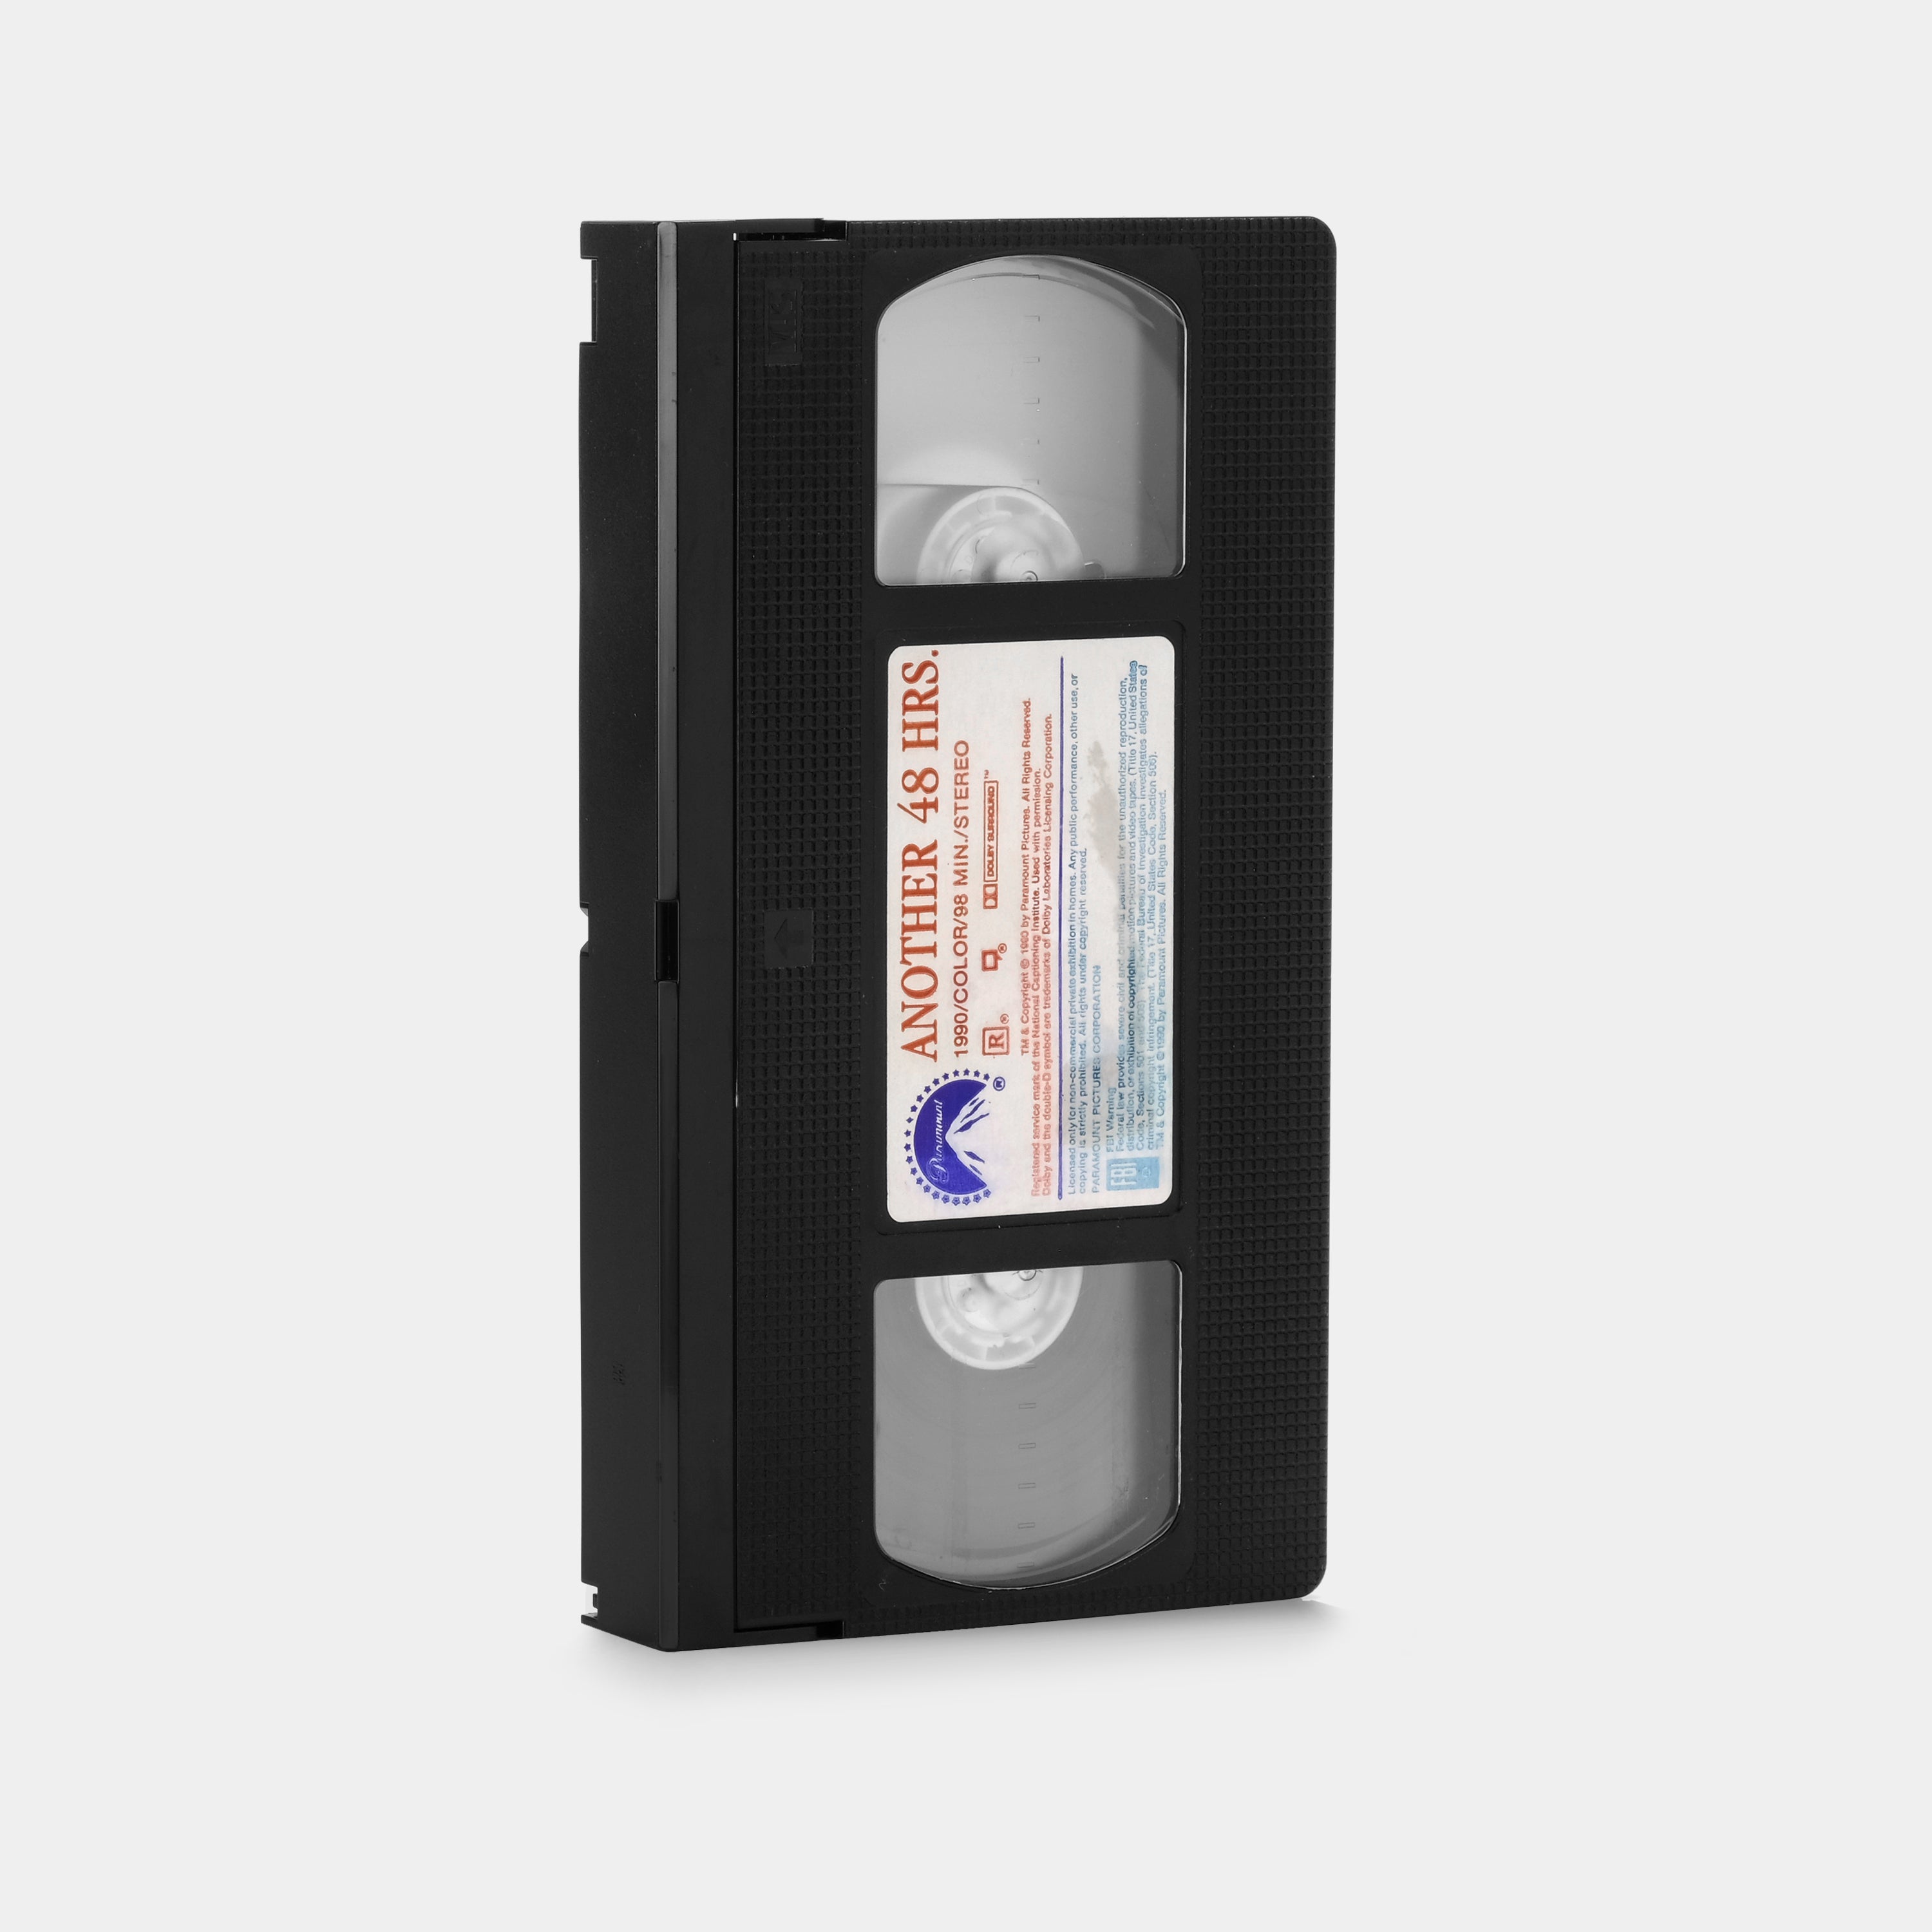 Another 48 Hours VHS Tape